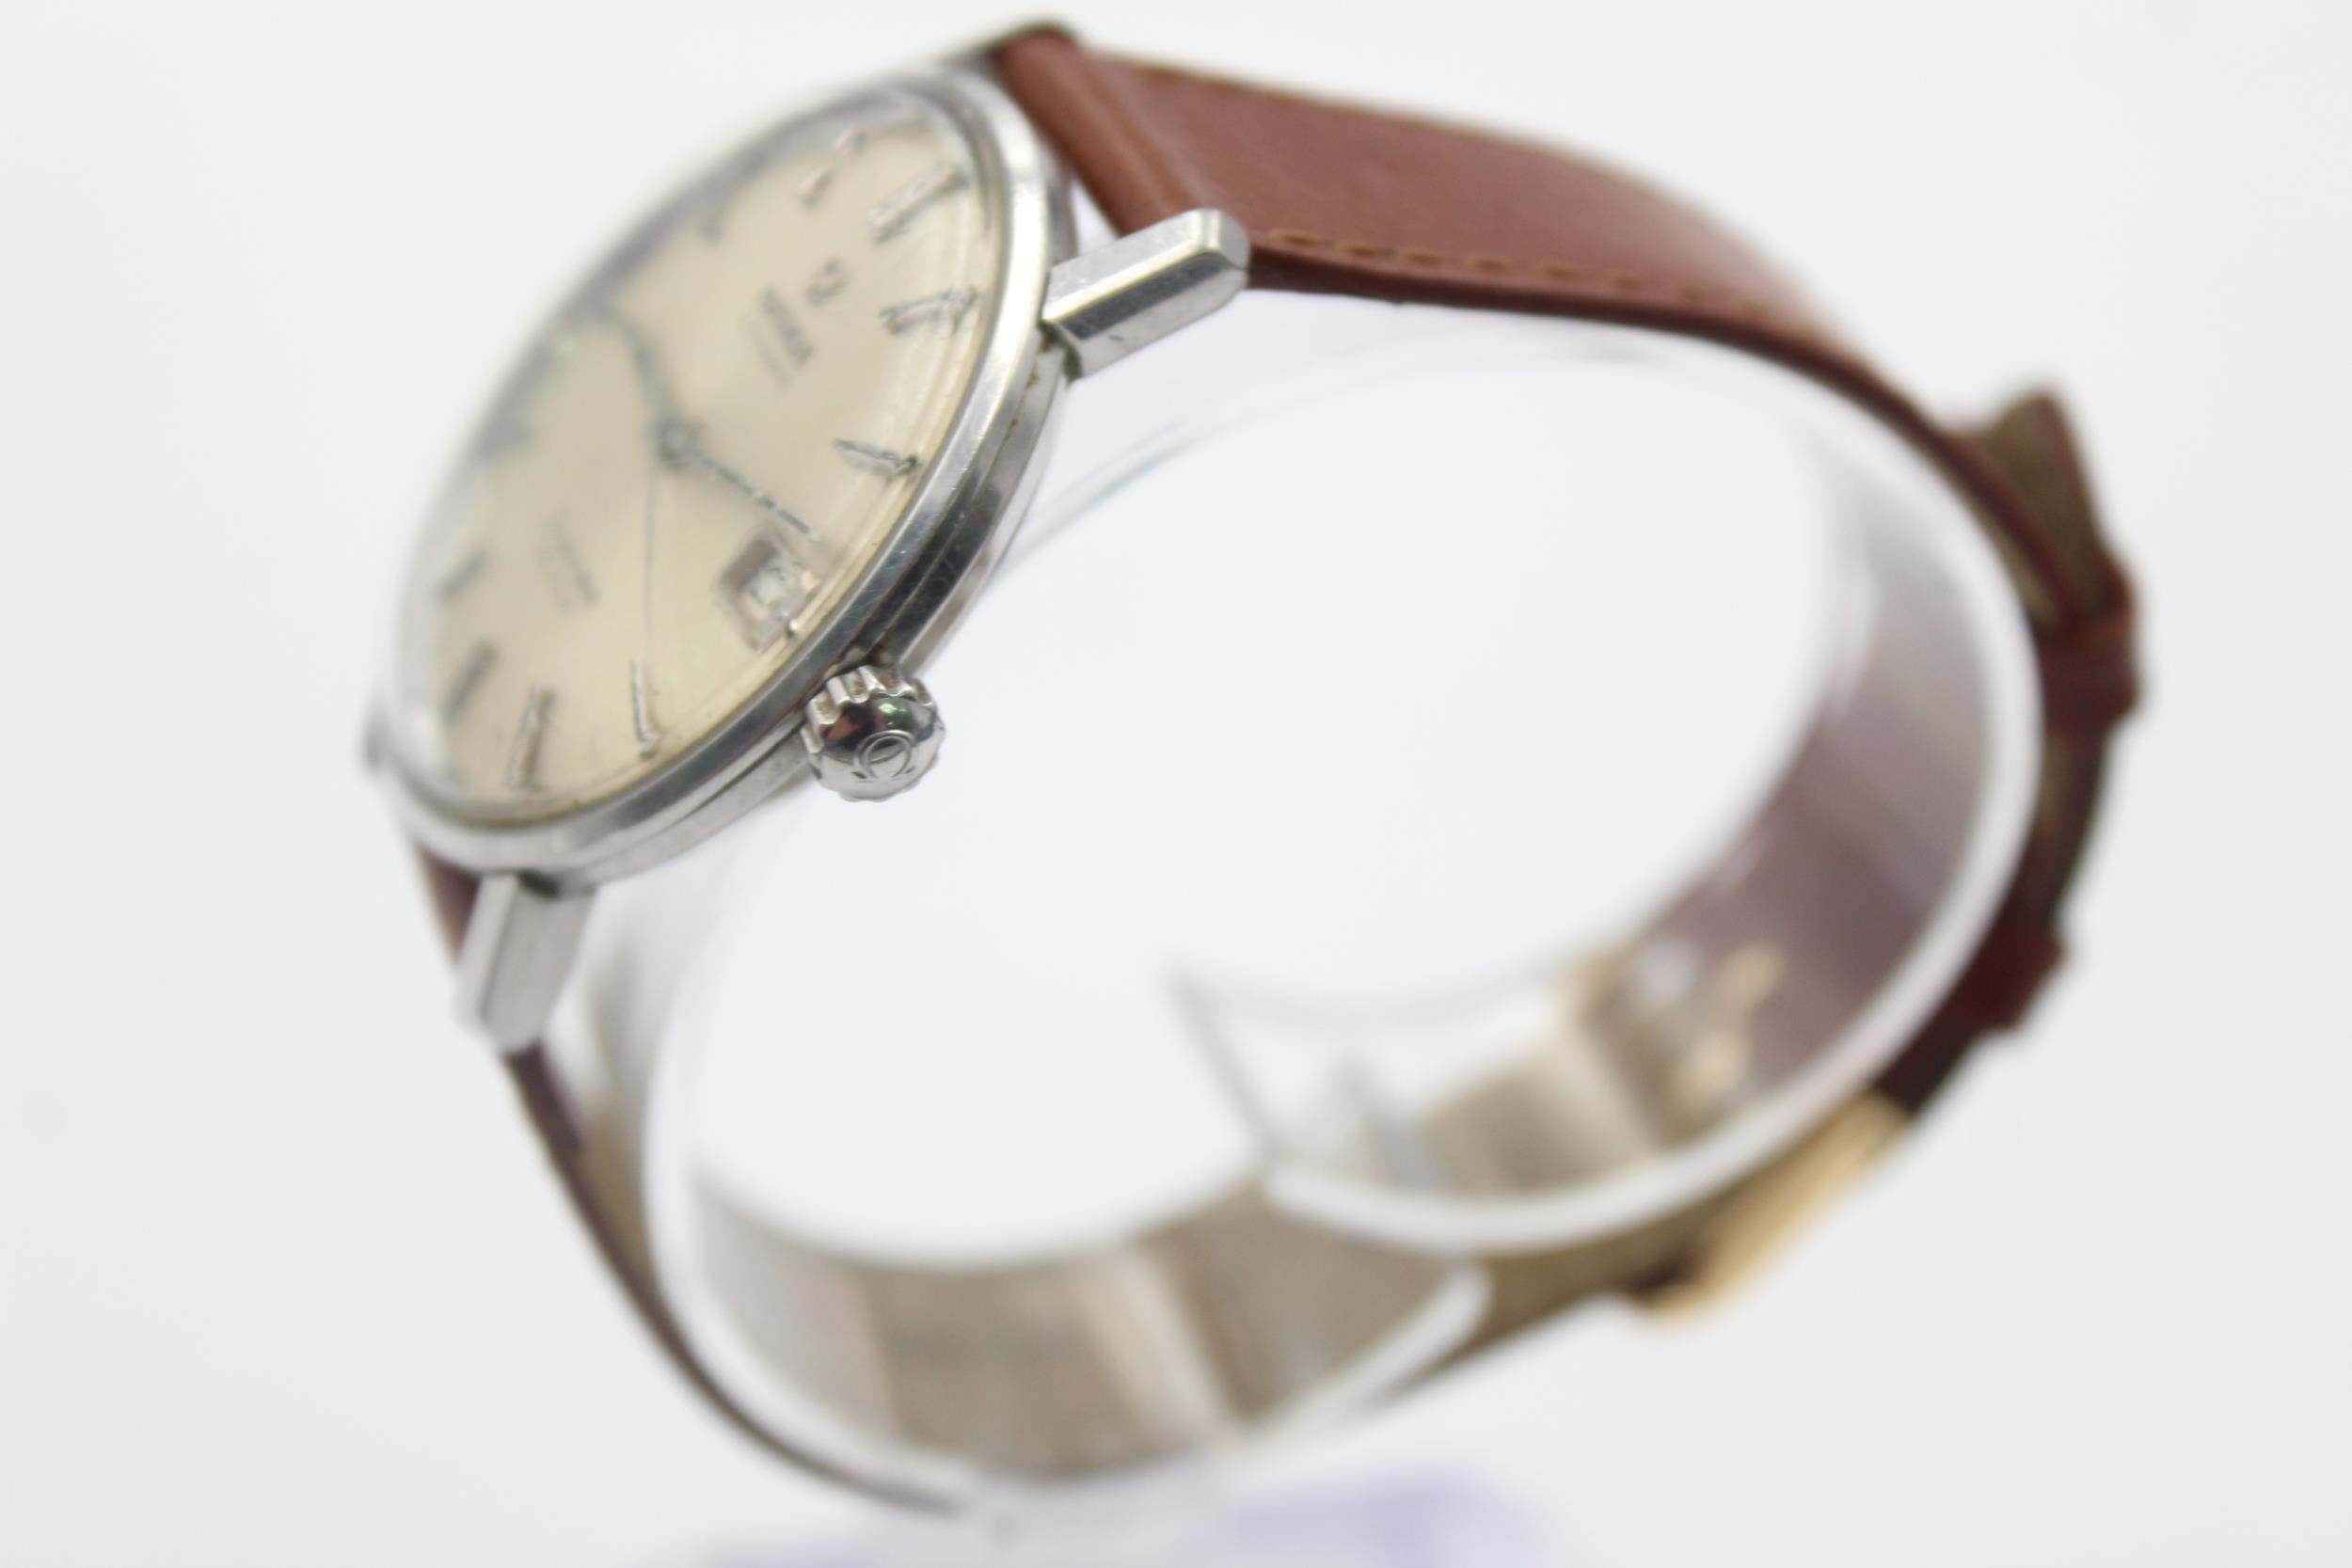 Vintage Gents OMEGA SEAMASTER DE VILLE WRISTWATCH Automatic WORKING - Image 3 of 5